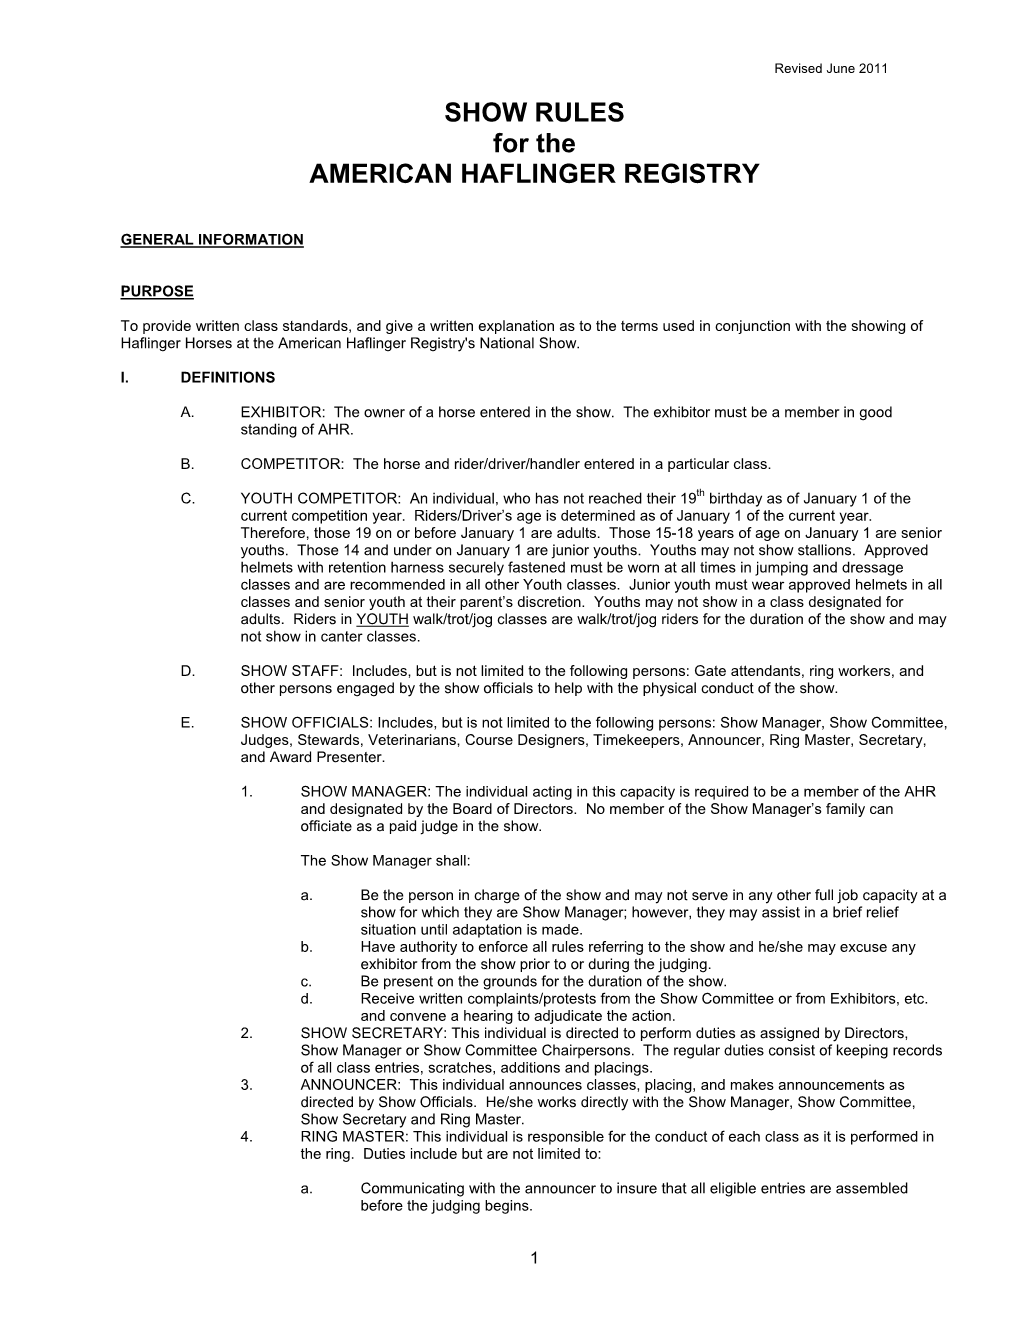 SHOW RULES for the AMERICAN HAFLINGER REGISTRY